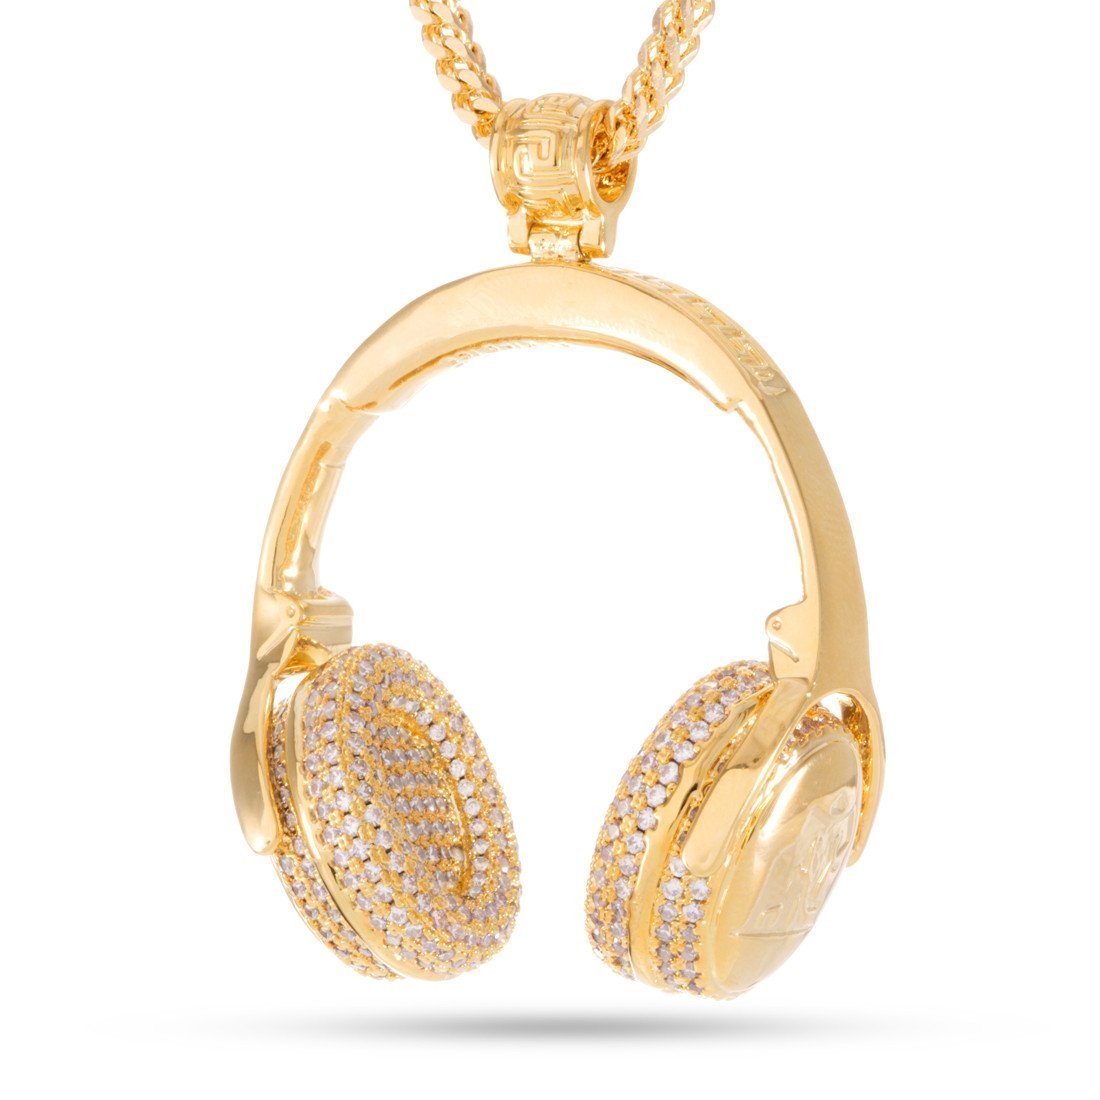 Headphones Necklace - Designed by Snoop Dogg x King Ice